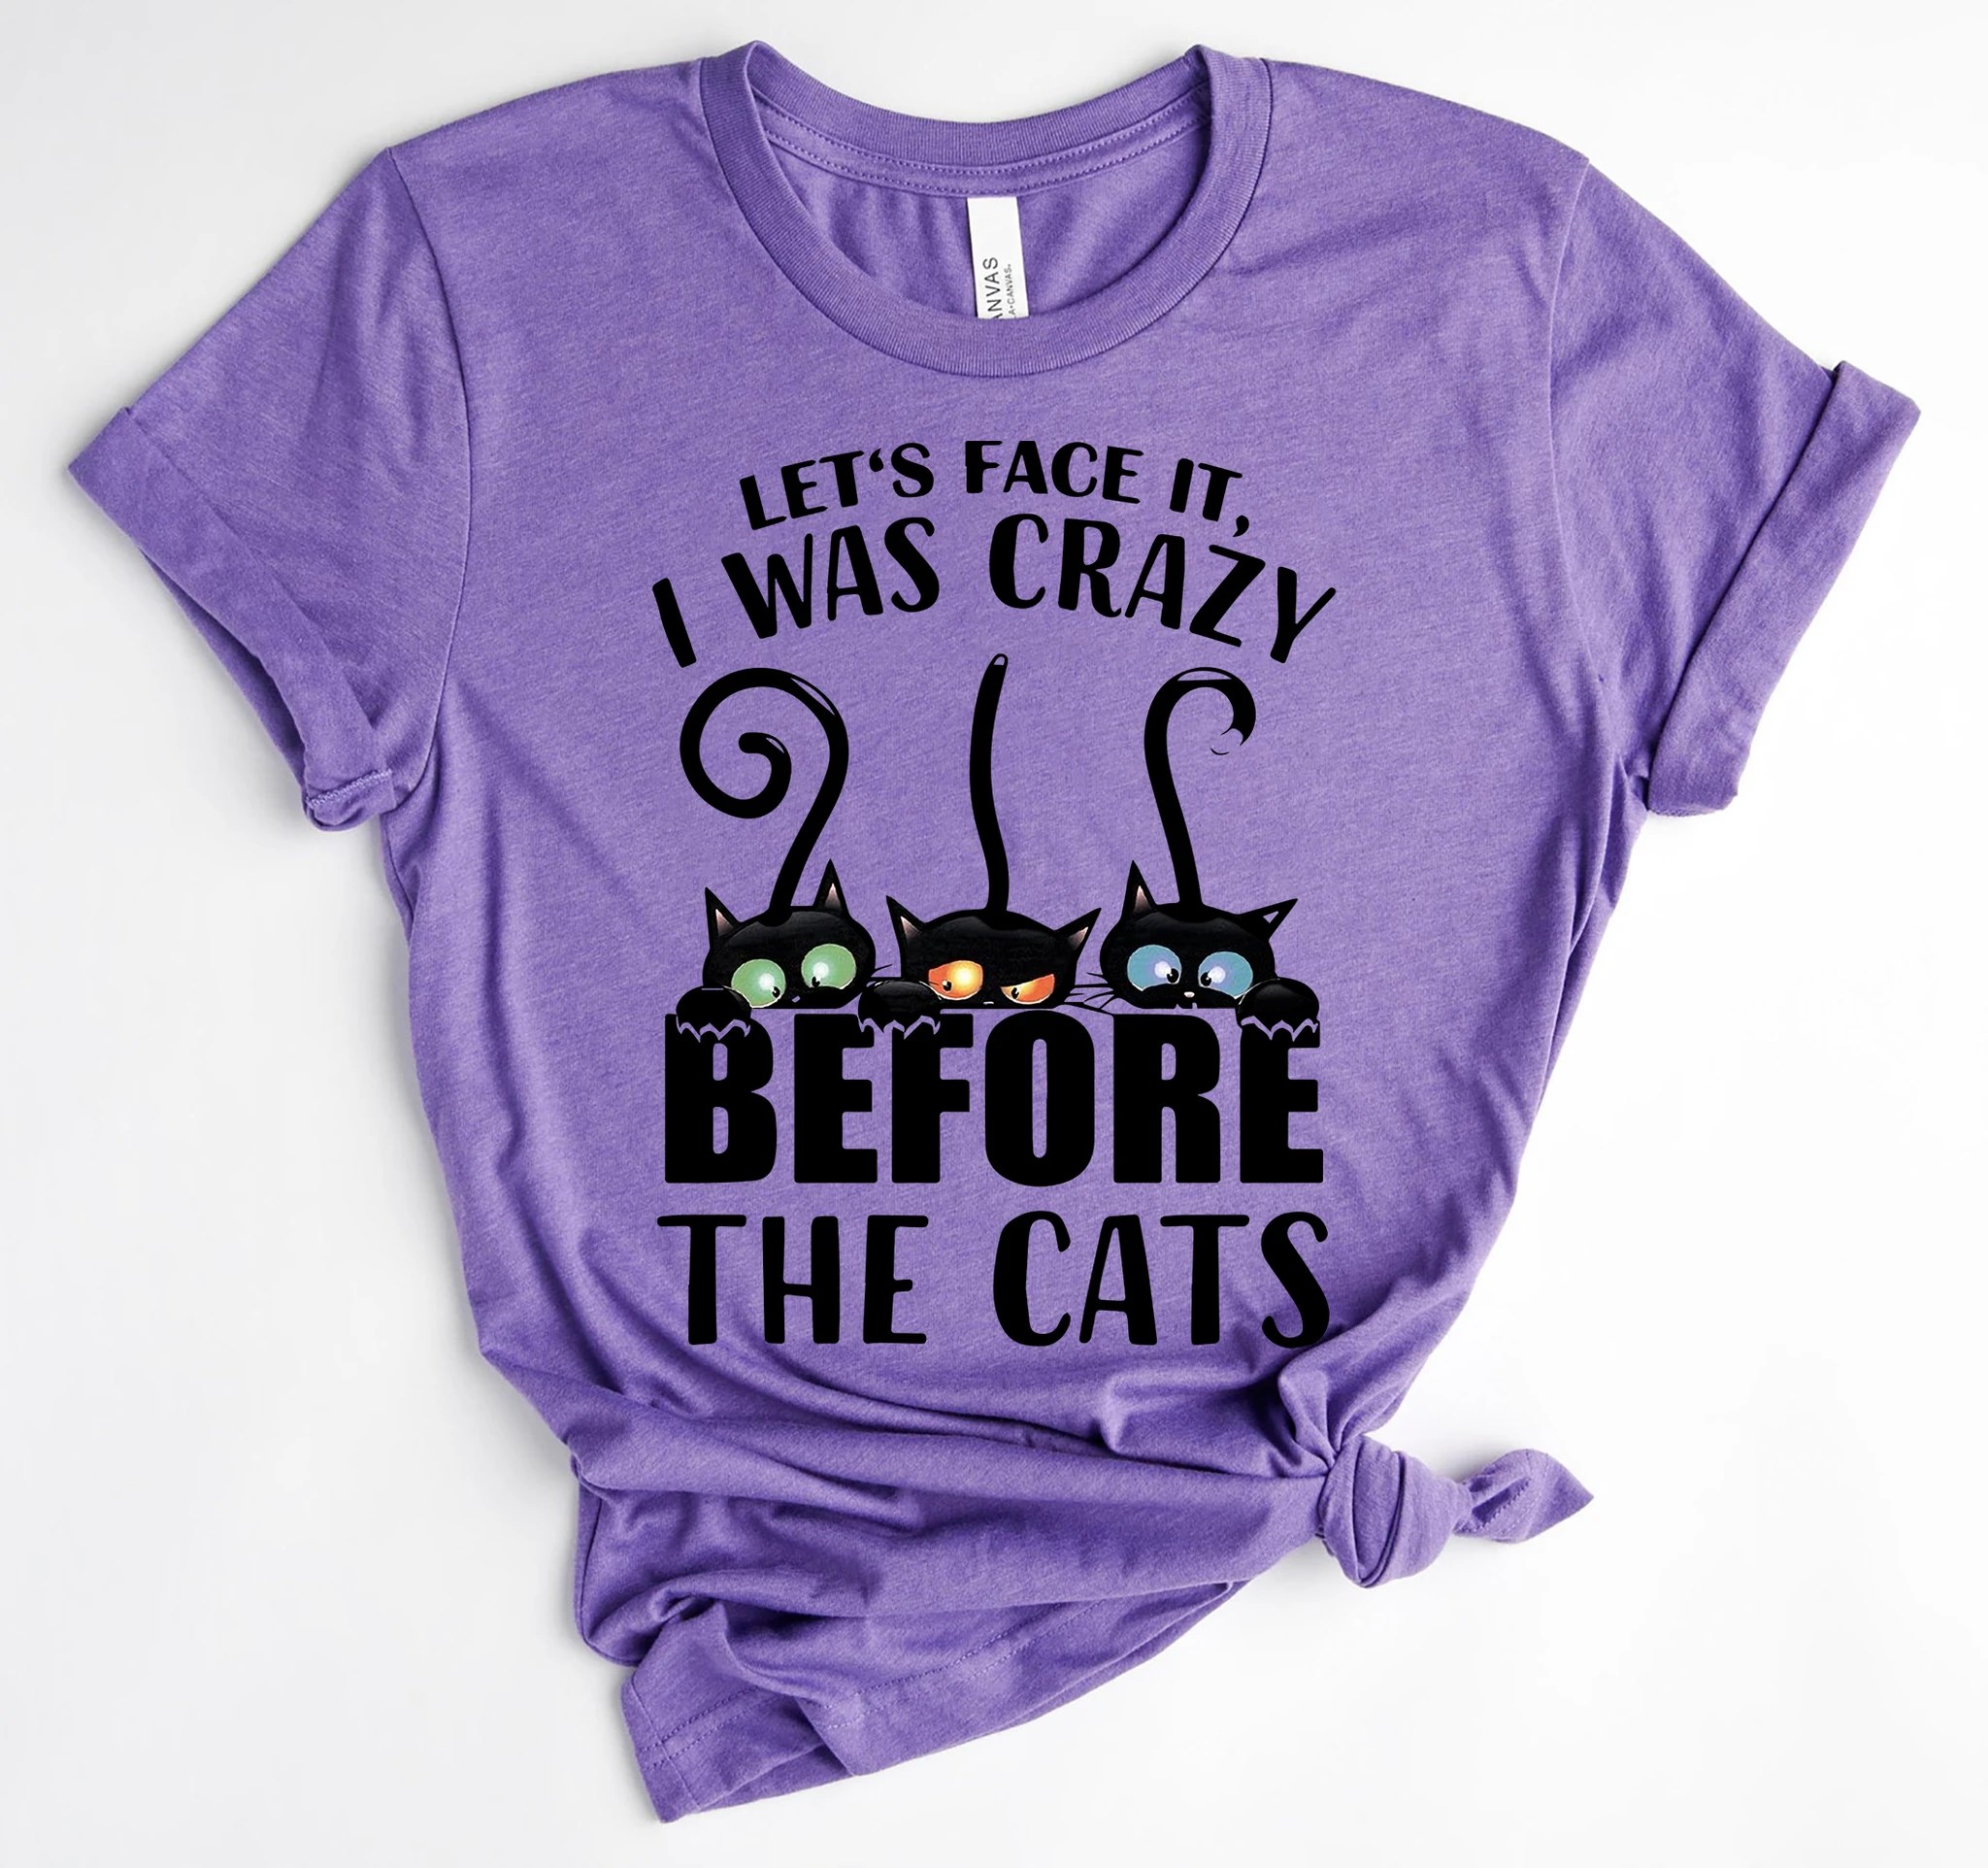 Let's face it, I was crazy before the cats - Cat lover